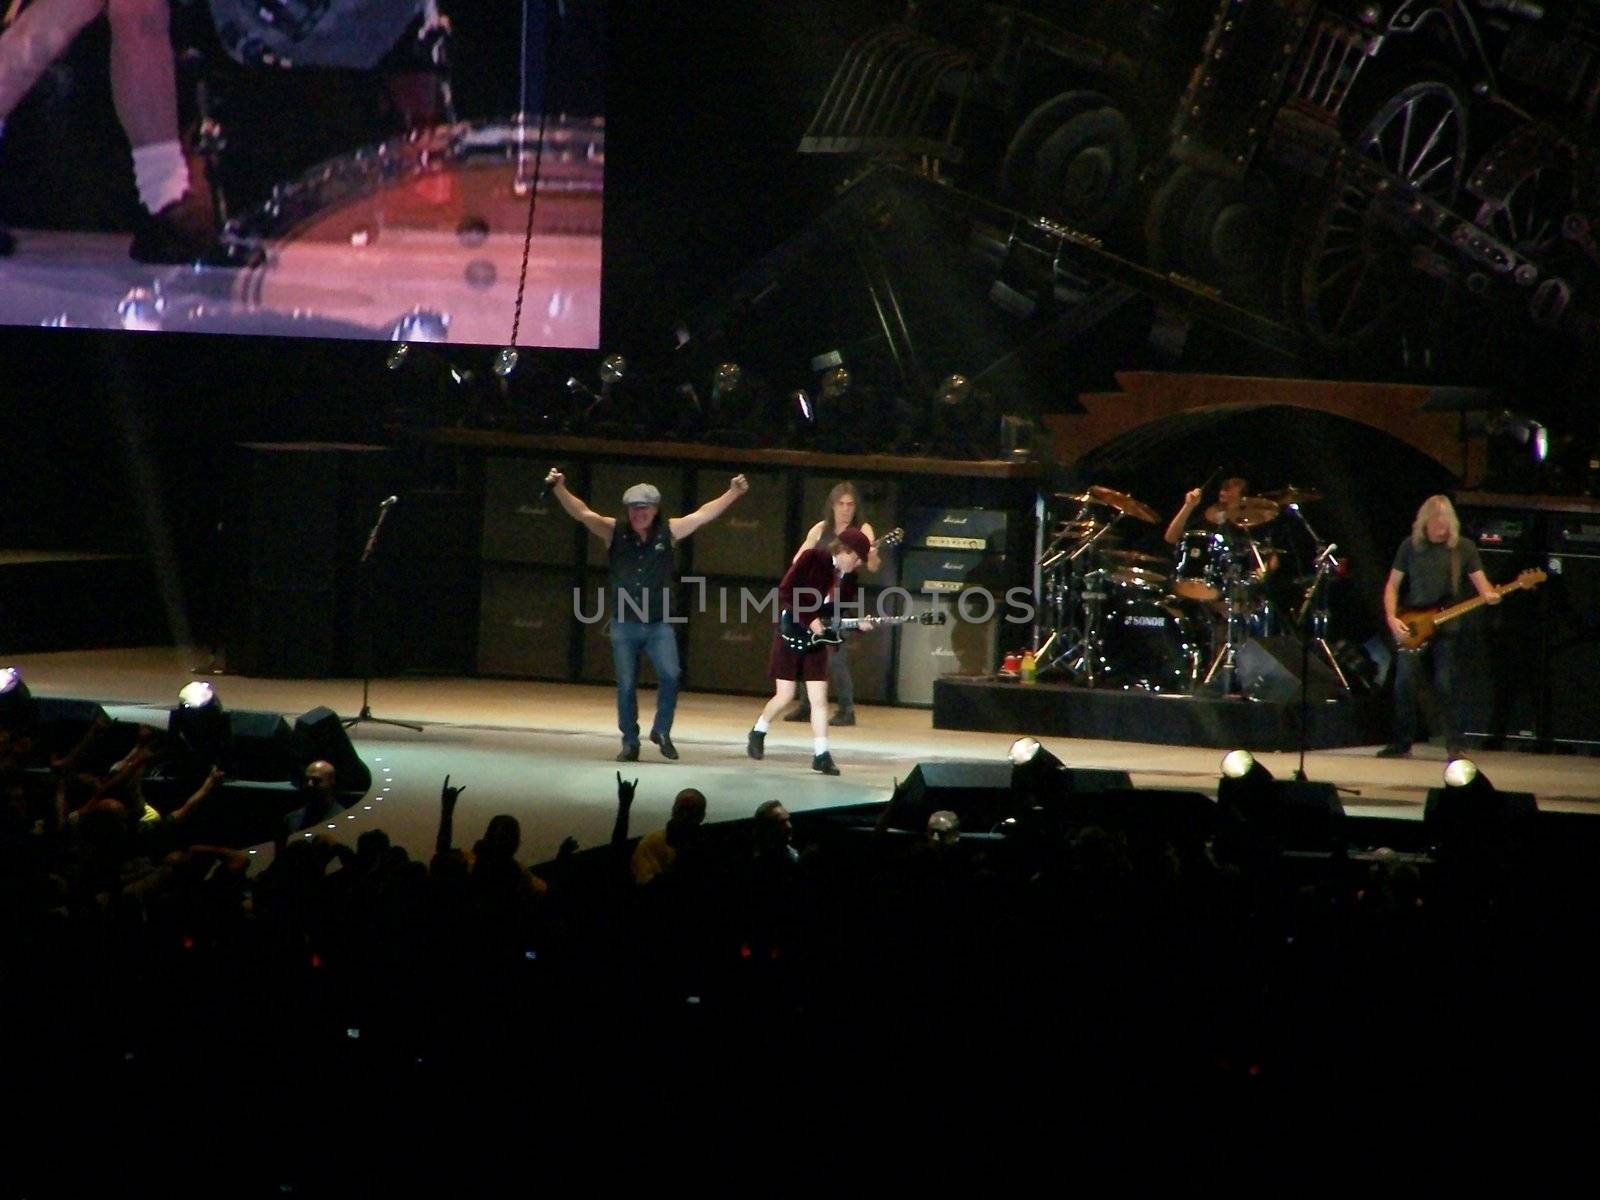 acdc on stage editorial use only